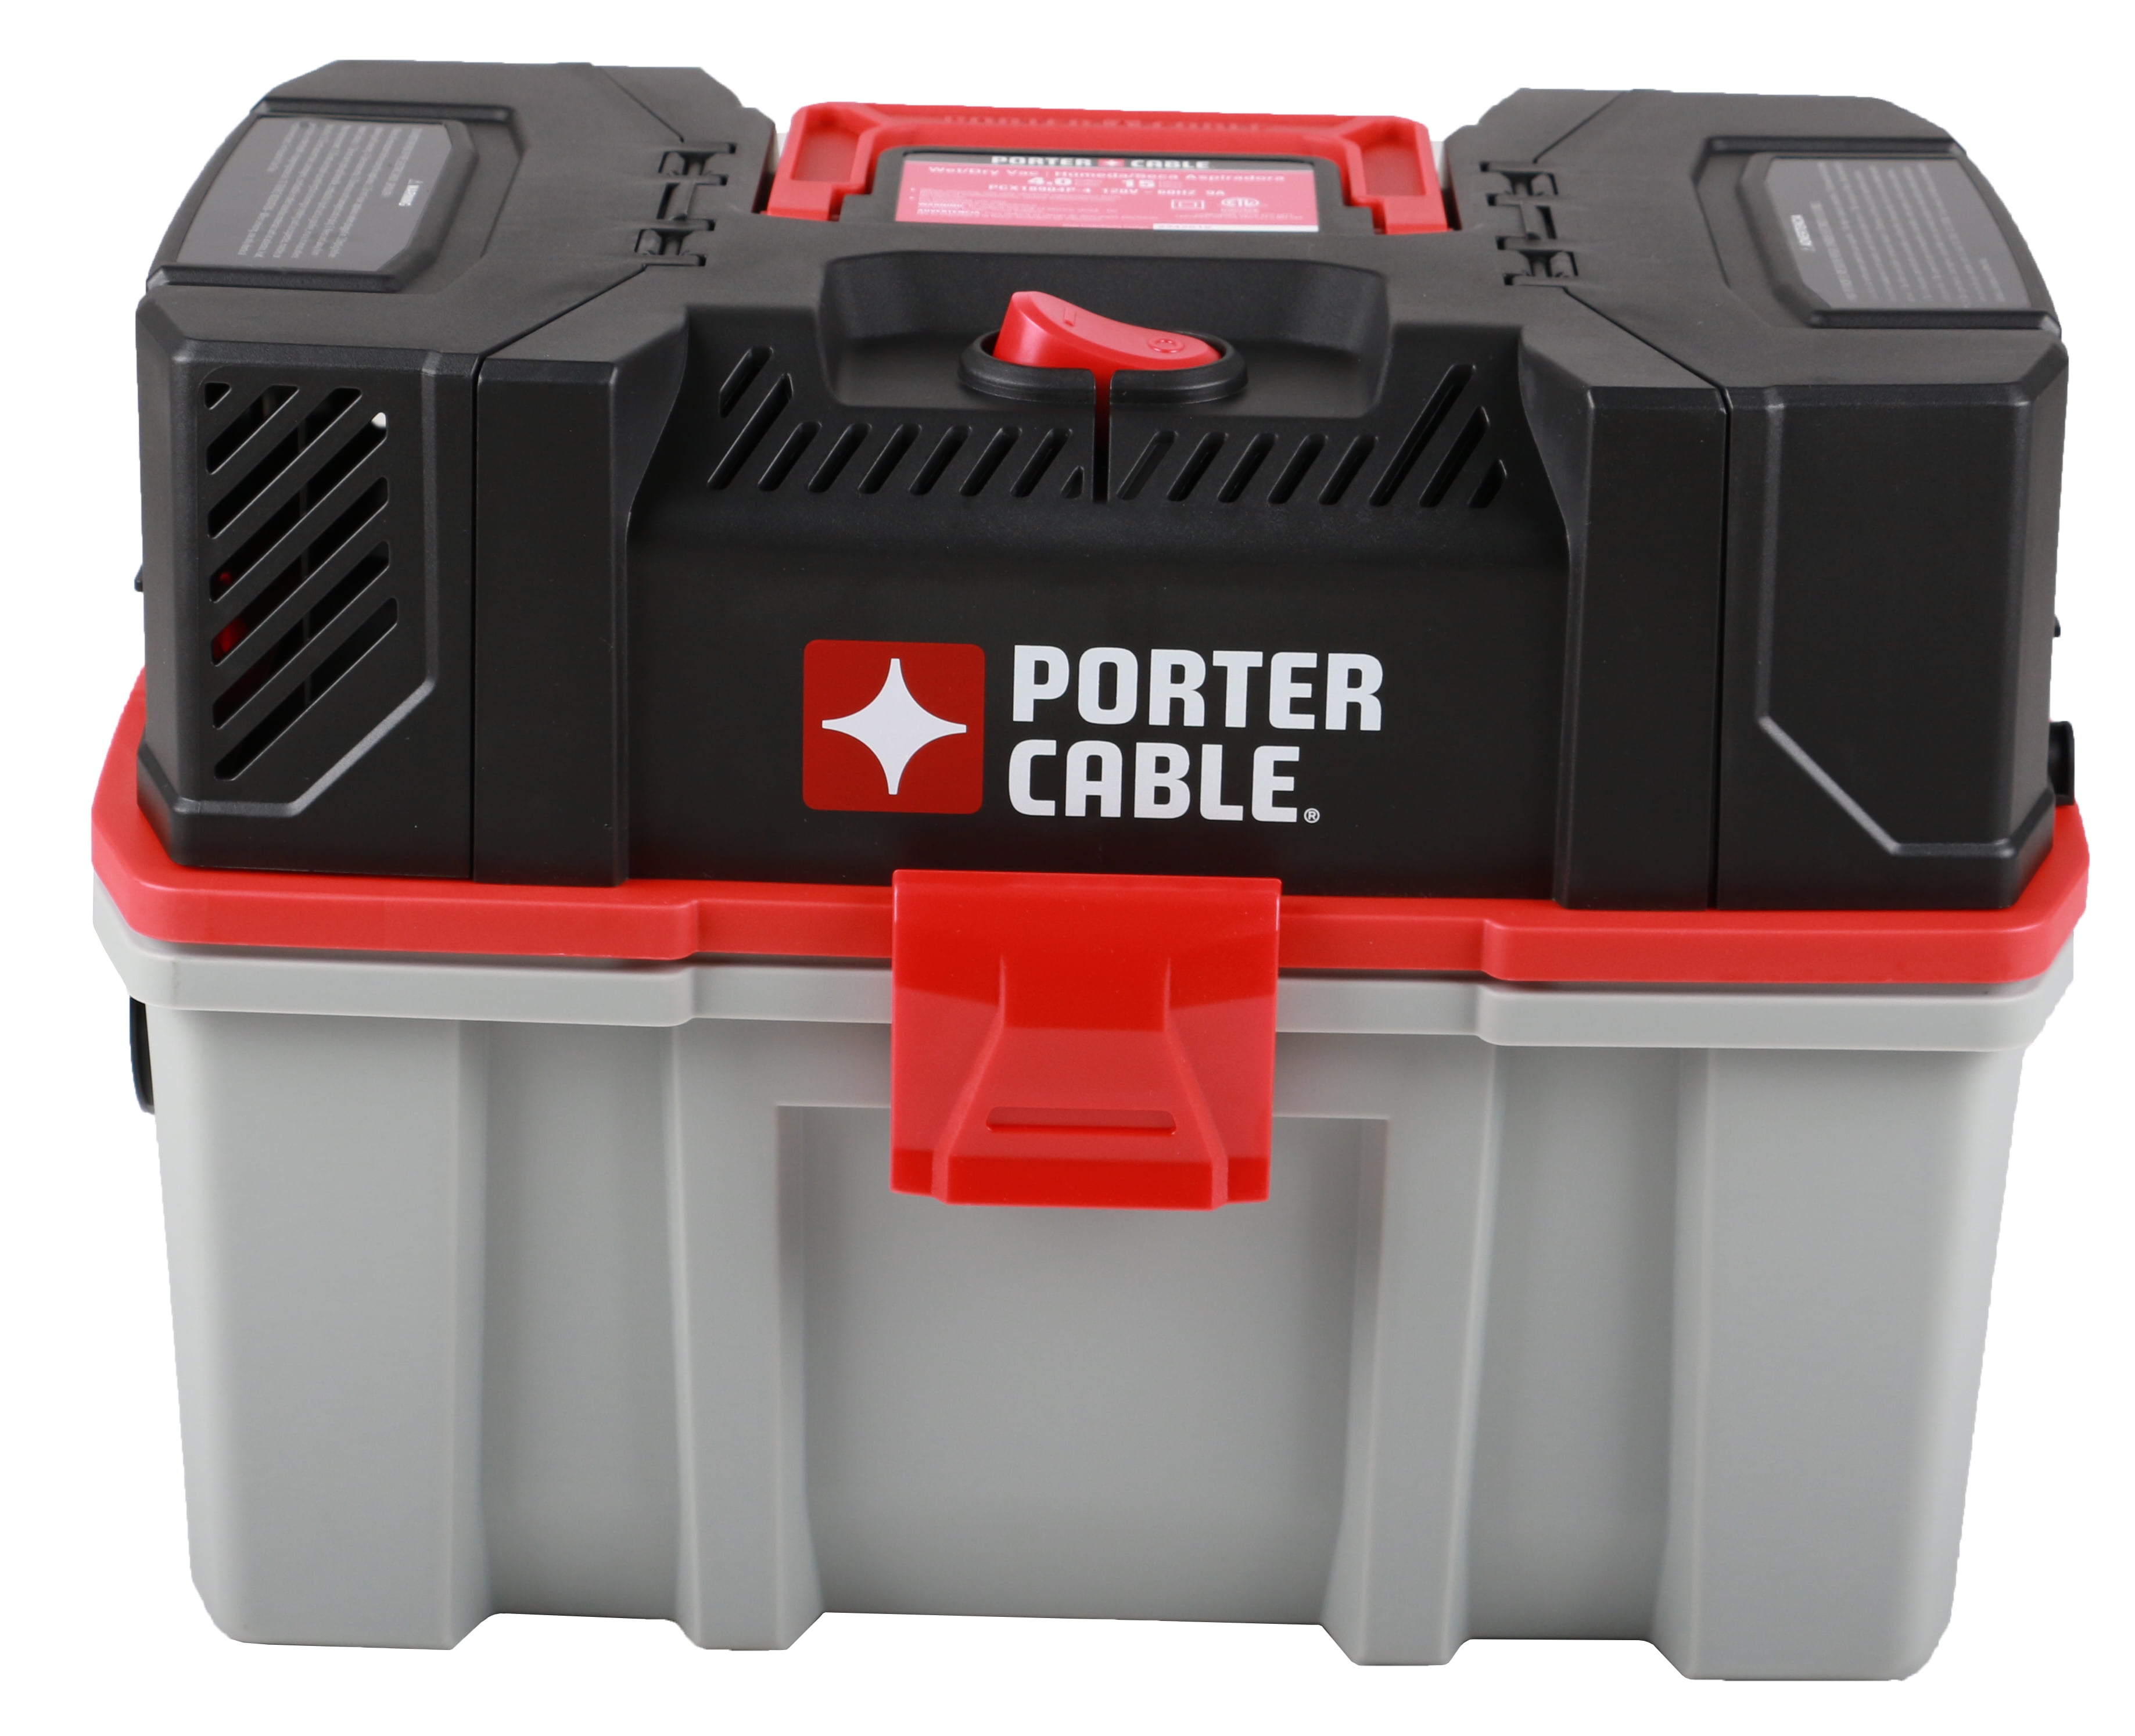 Porter-Cable Vacuum Vac 4 Gallon 4 Peak HP 960W Stainless Steel Pre-Owned 